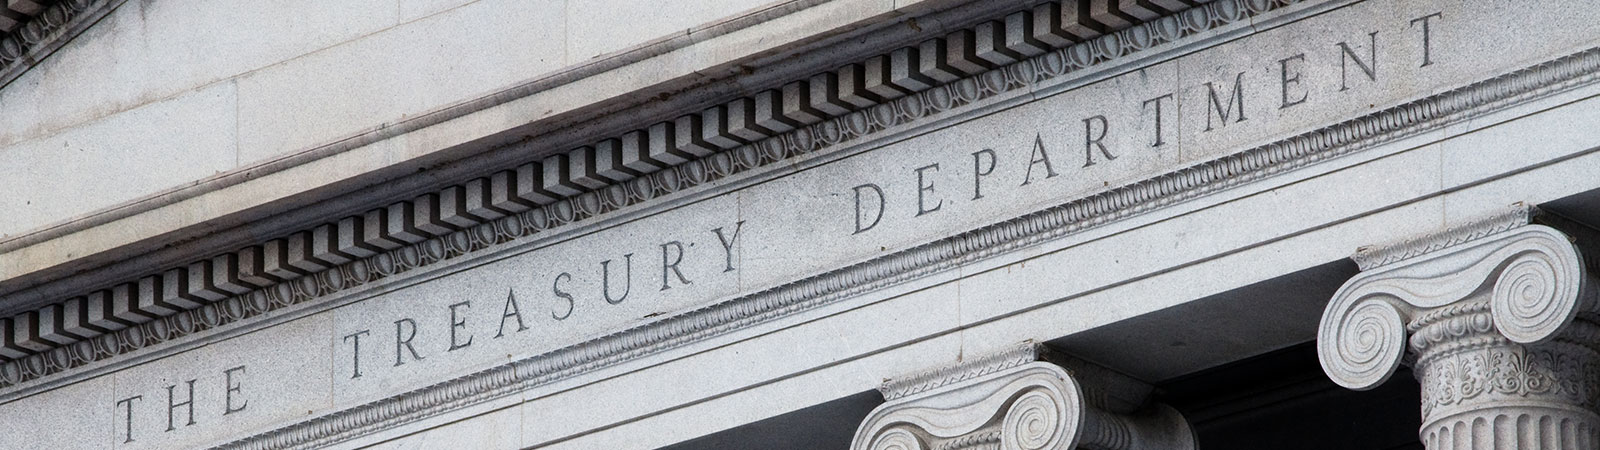 The GSA treasury department building has a sign that says treasury department.